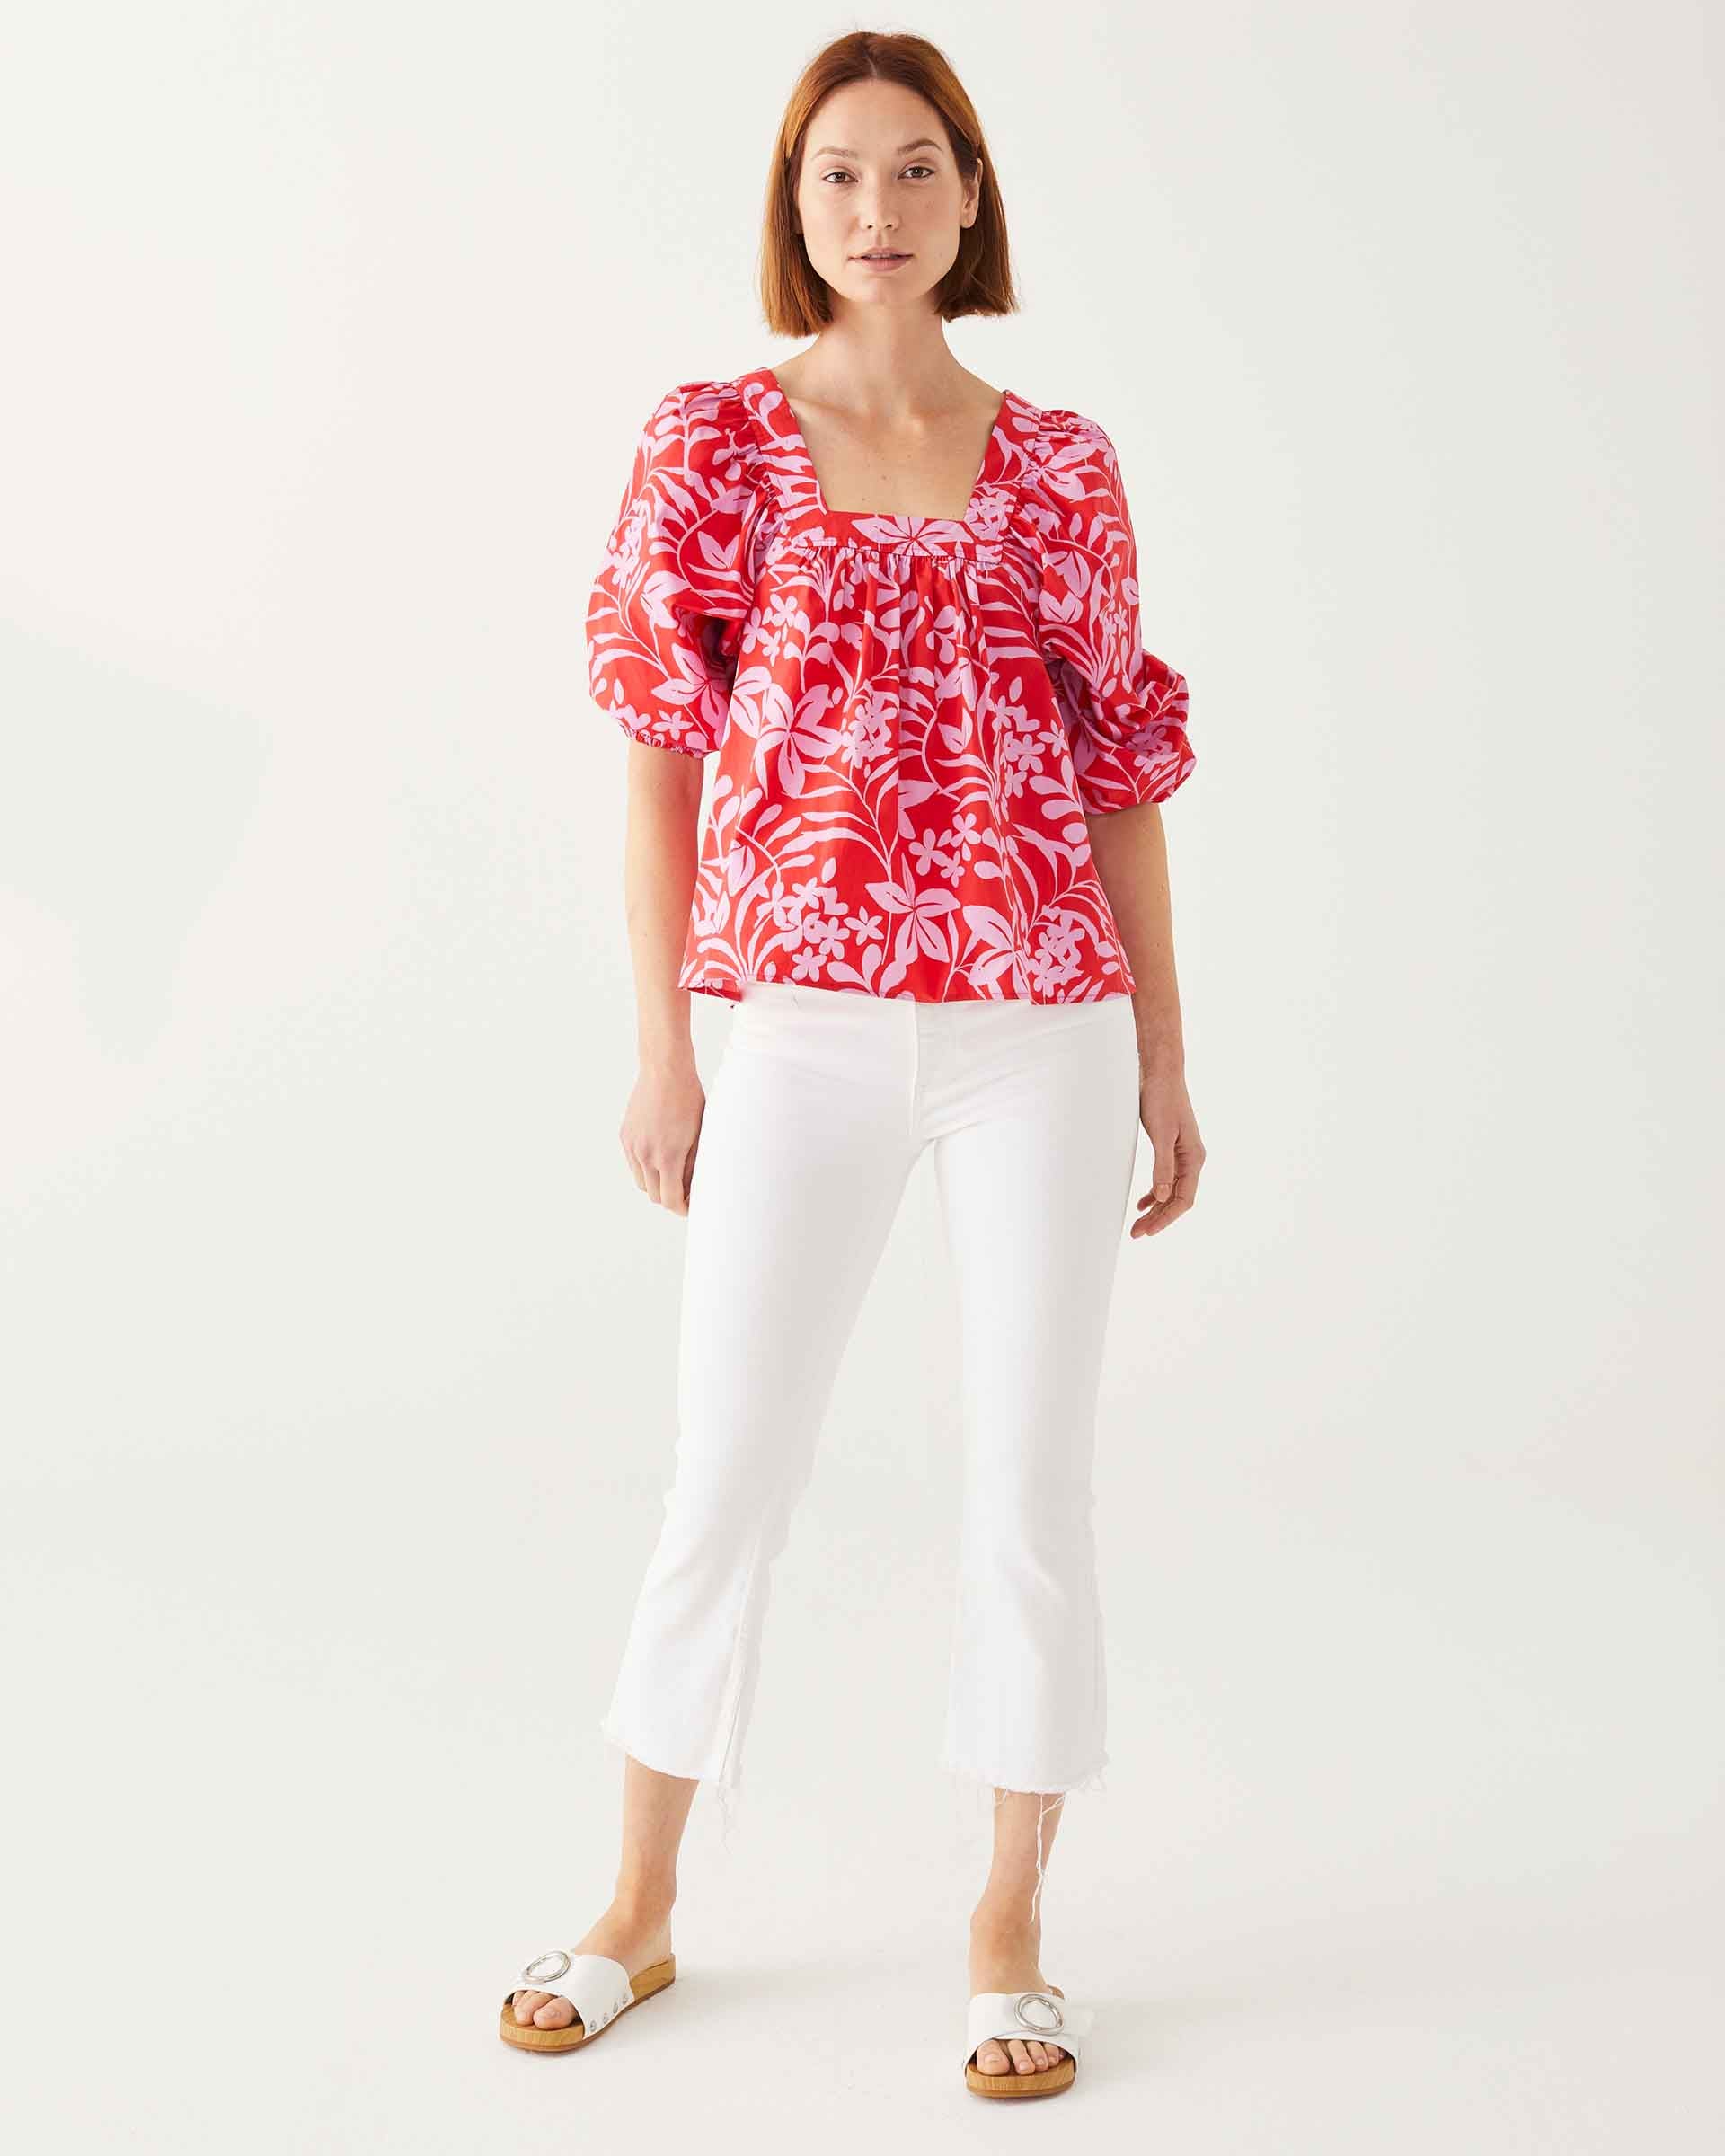 female wearing red top with pink floral print and puff sleeves standing on a white background